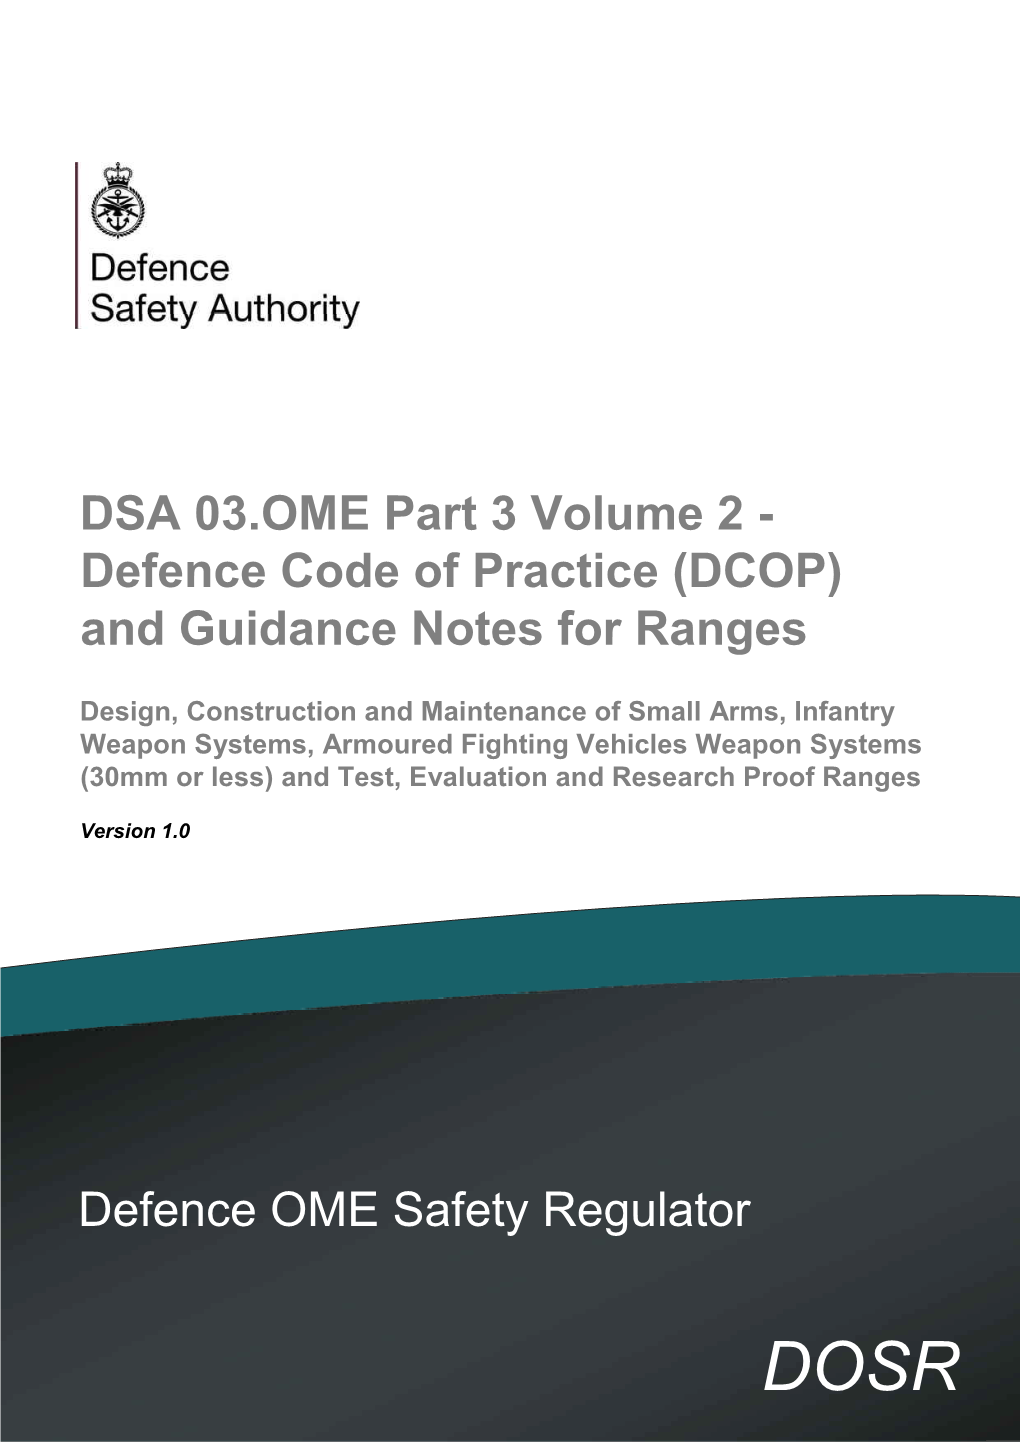 DSA 03.OME Part 3 Volume 2 - Defence Code of Practice (DCOP) and Guidance Notes for Ranges